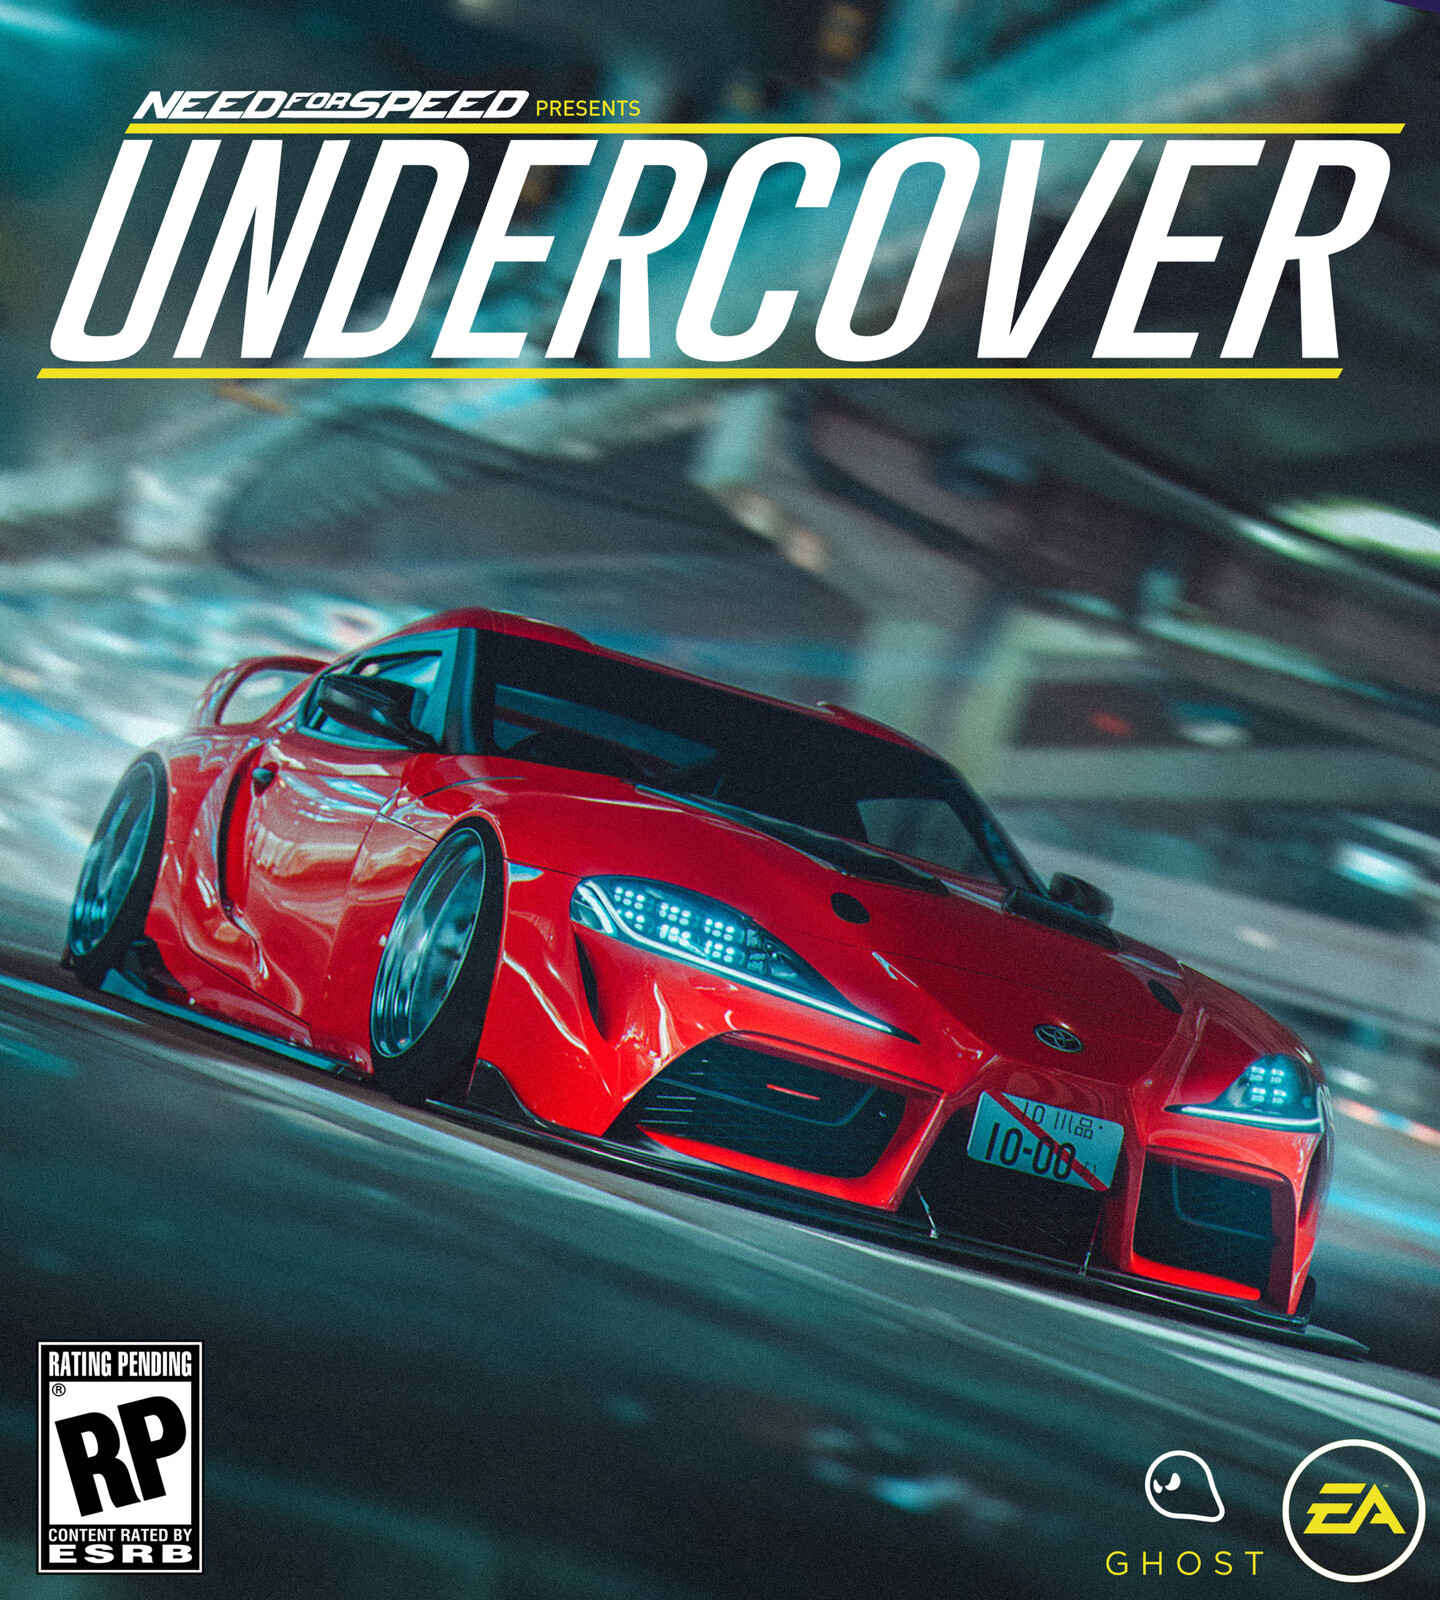 Need for Speed™ Presents: Undercover - 02 (Based on Khyzyl Saleem art)